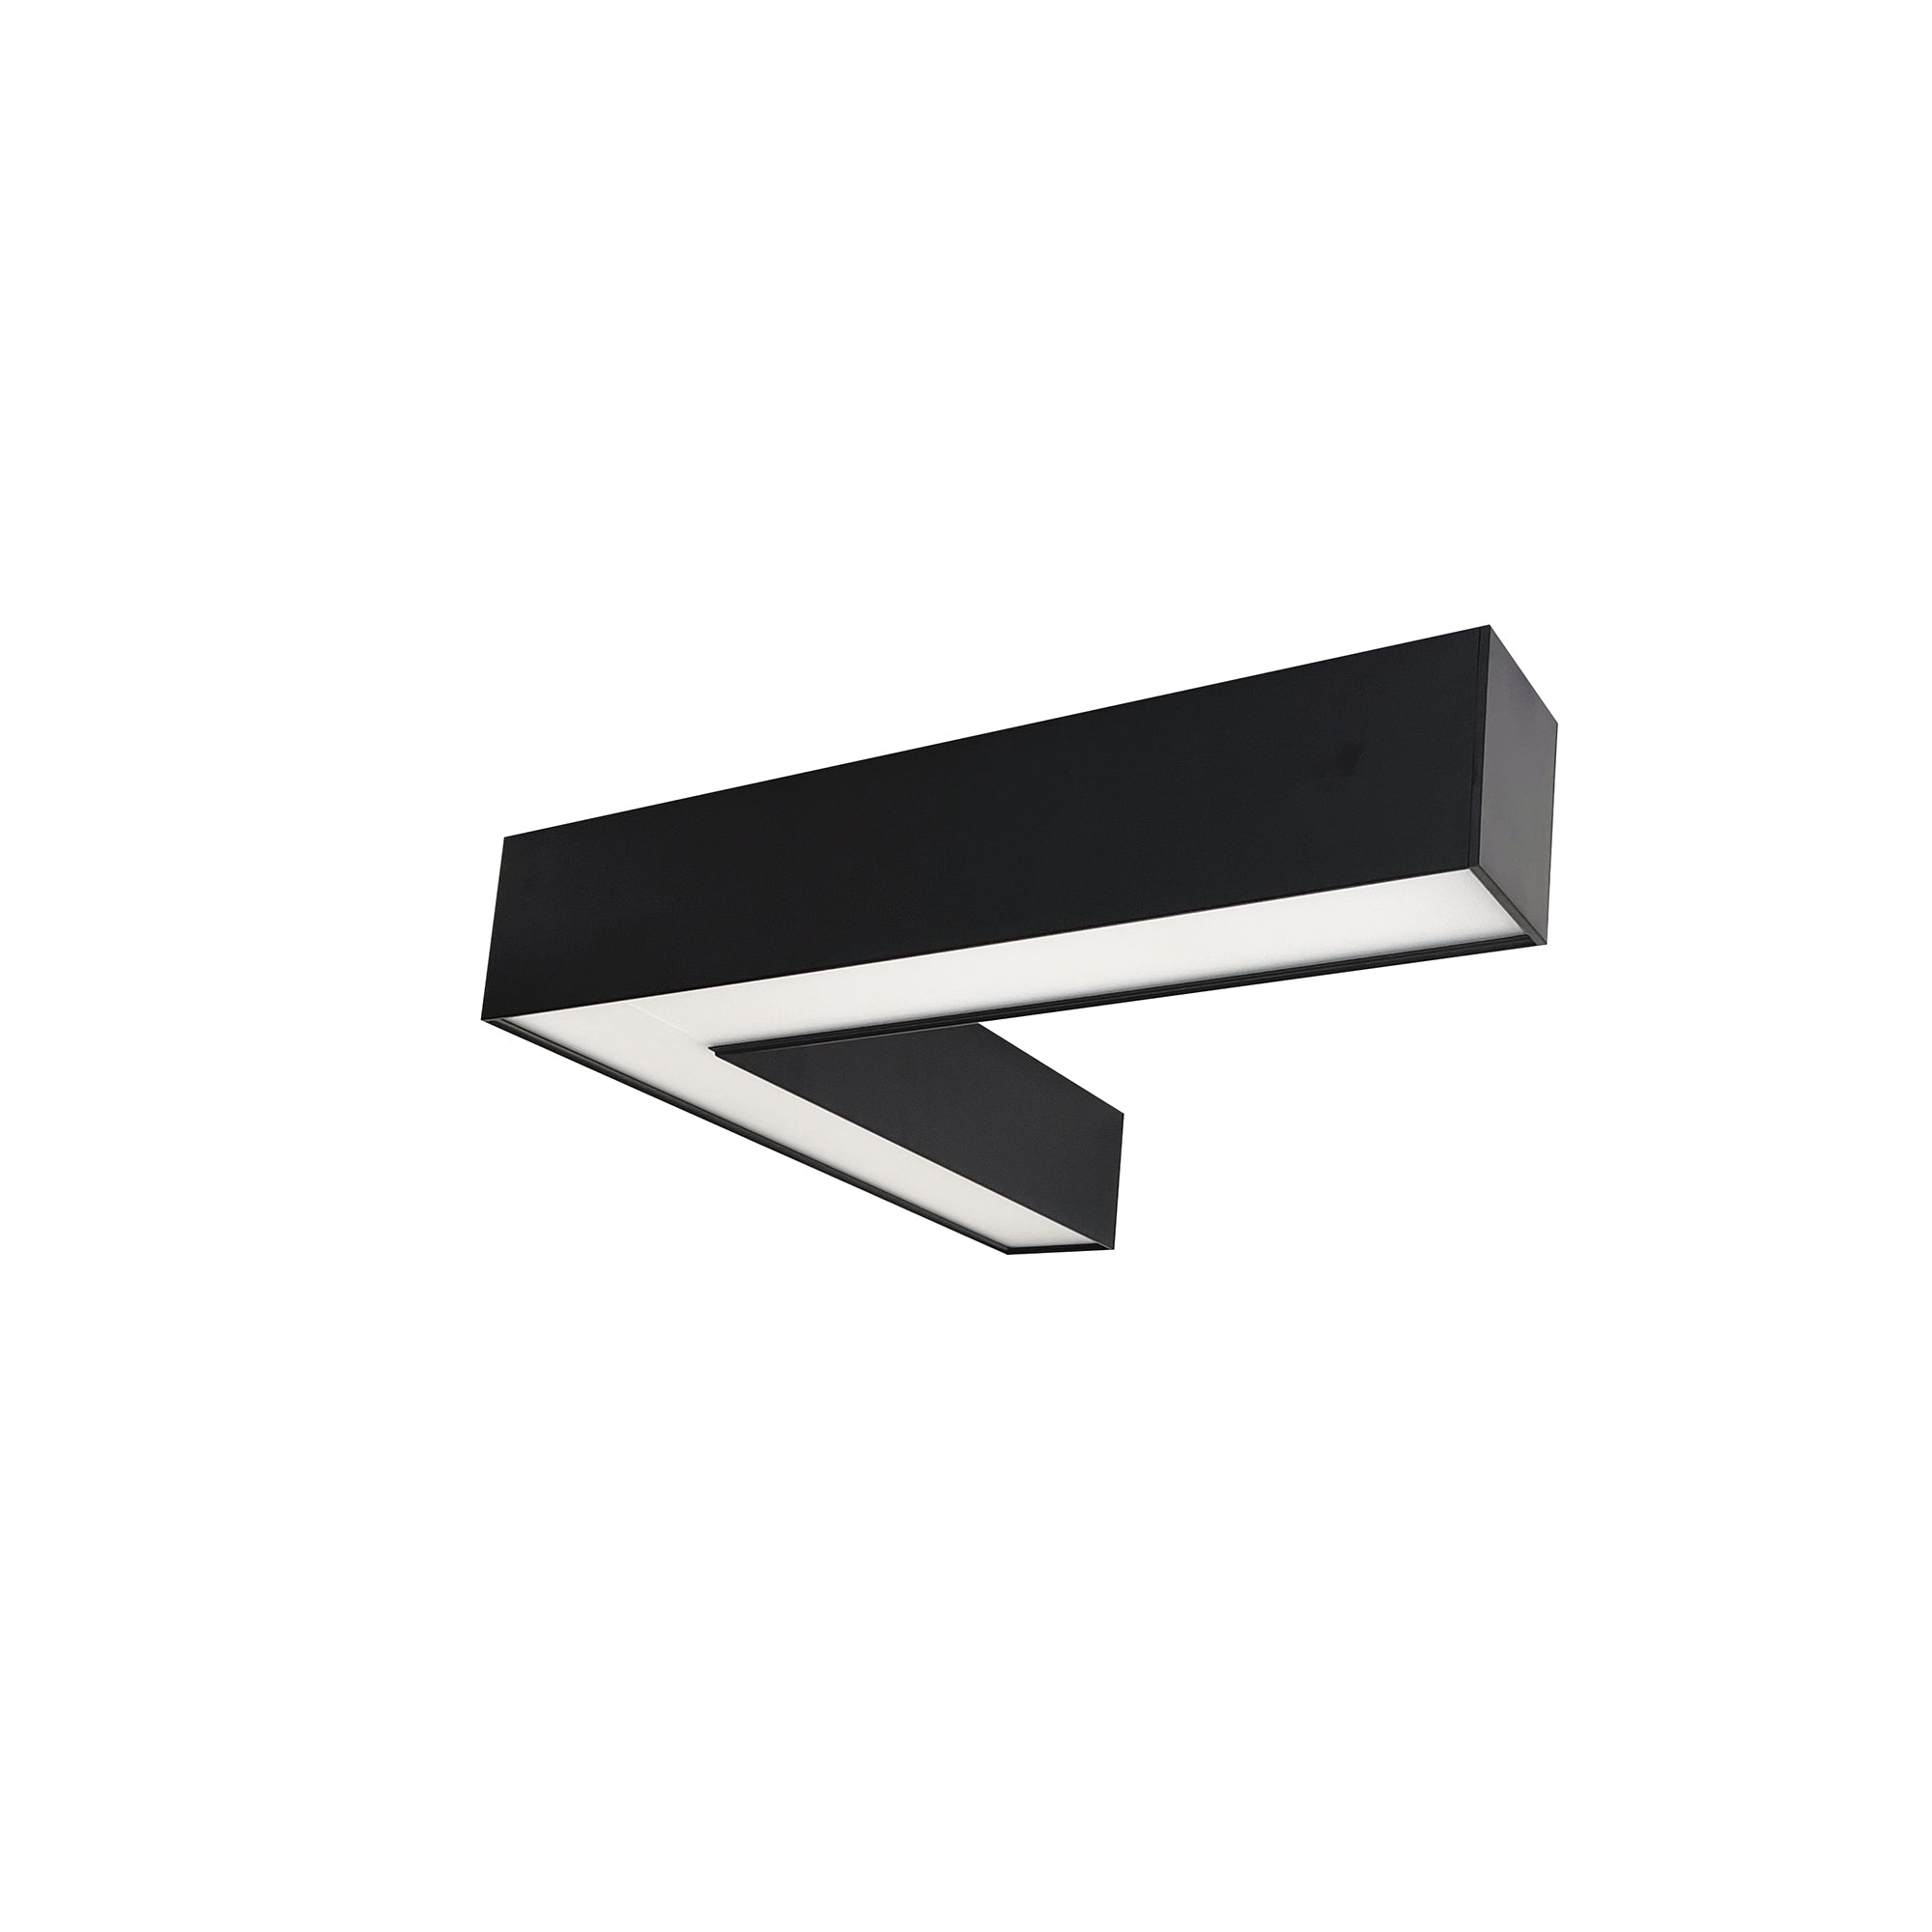 Nora Lighting NLUD-L334B - Linear -  InchL Inch Shaped L-Line LED Indirect/Direct Linear, 3781lm / Selectable CCT, Black Finish